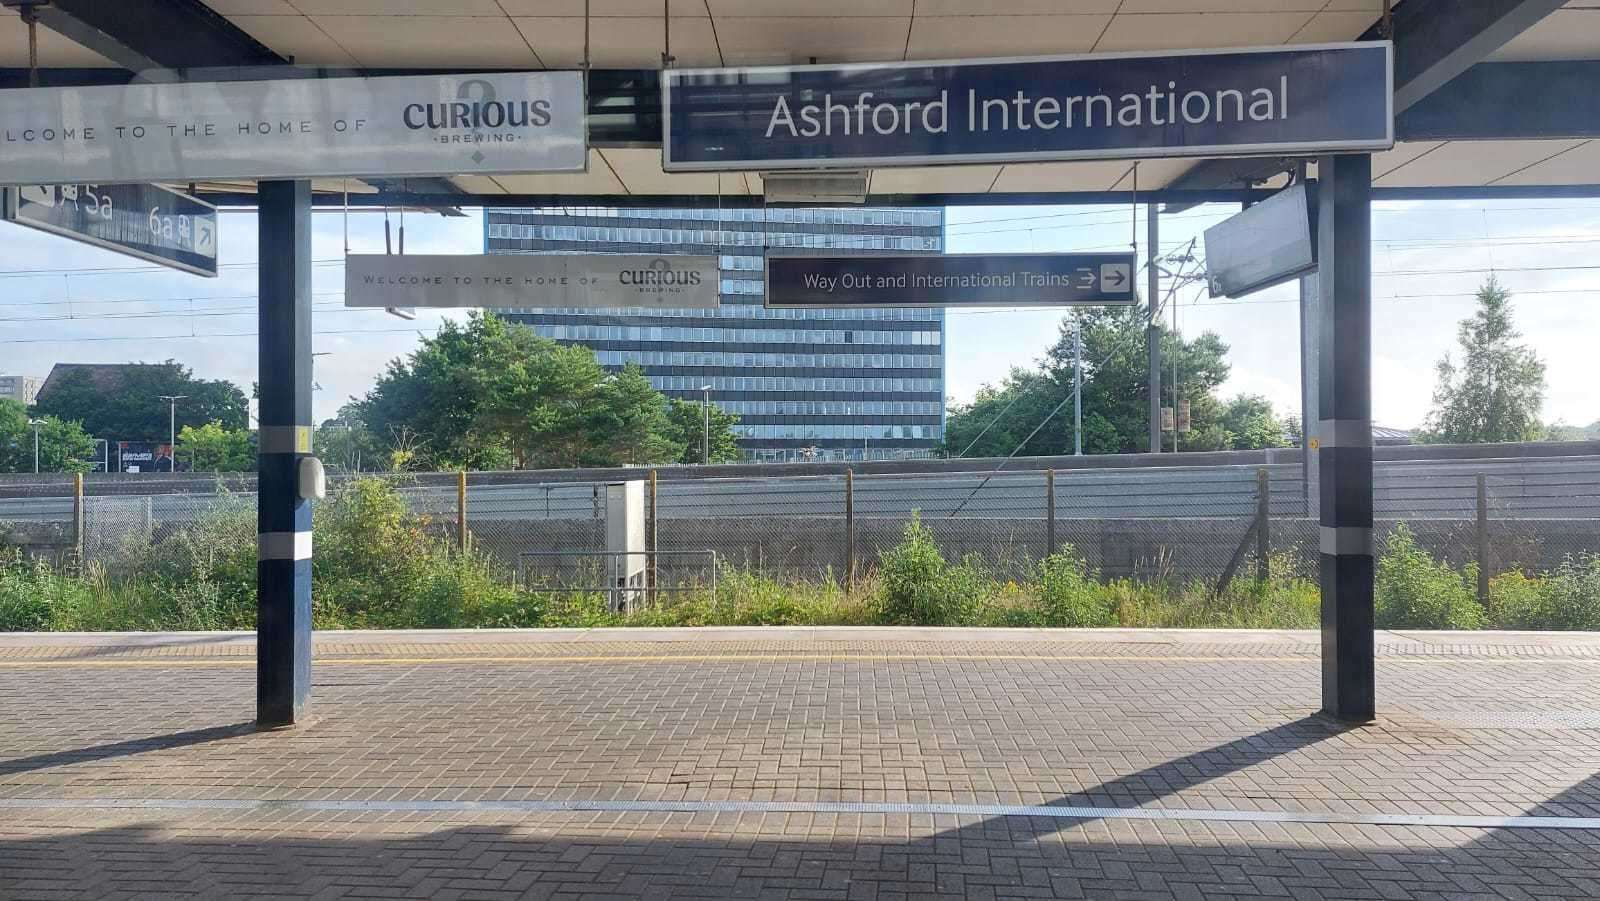 Olivia commutes from Ashford International to her job in London